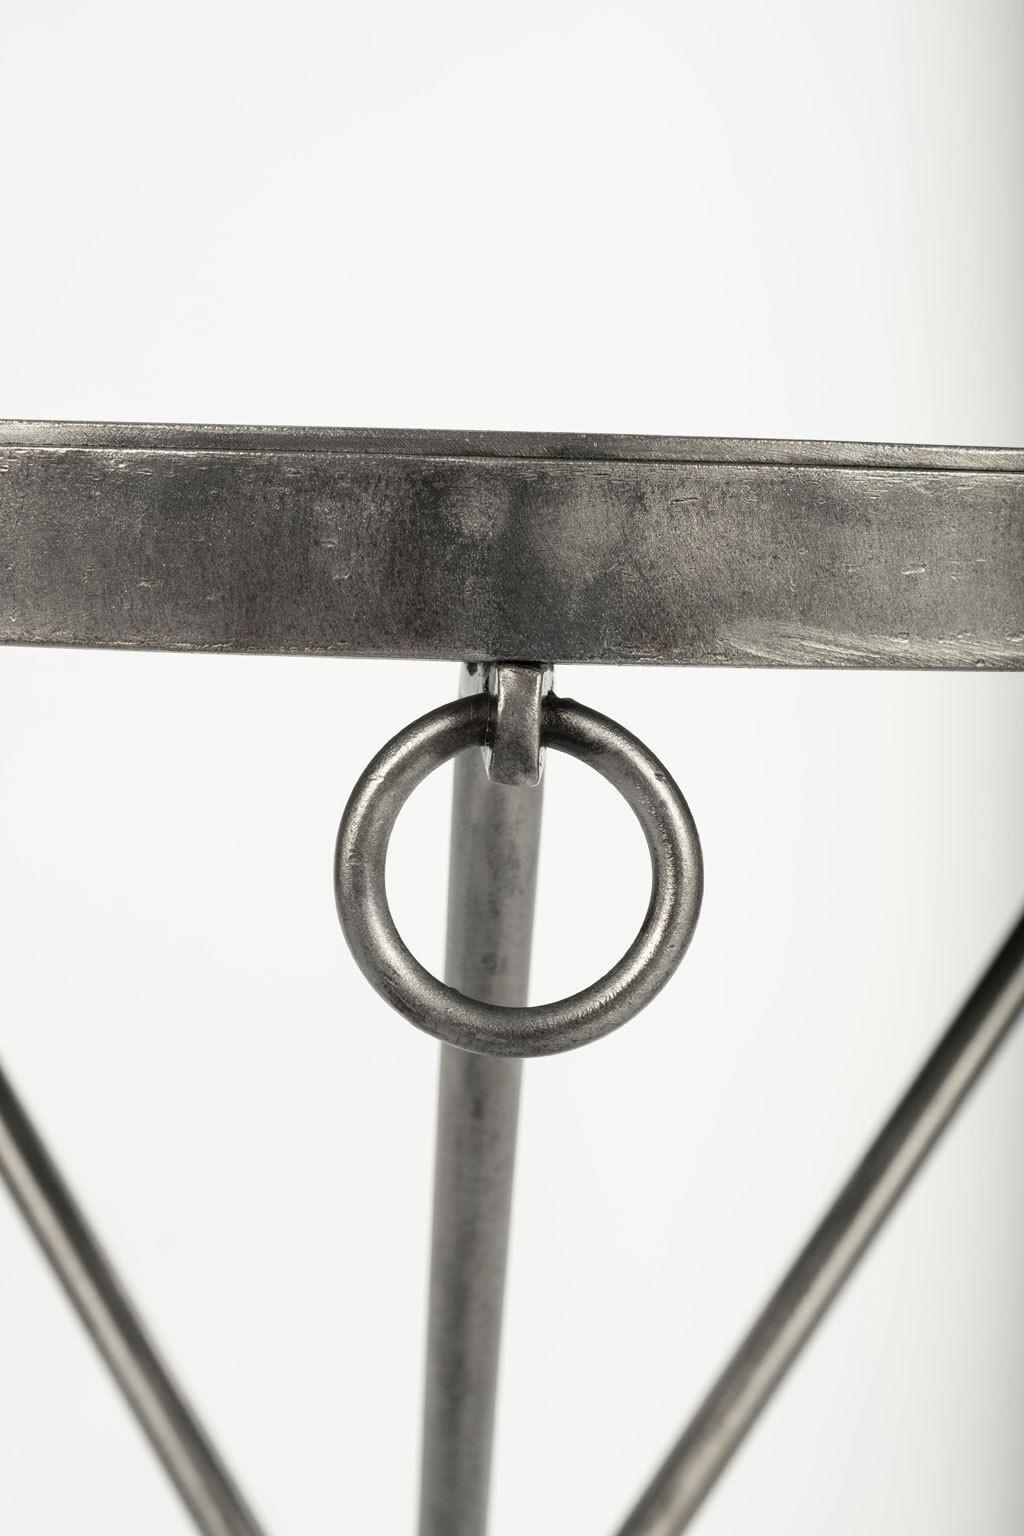 Large custom steel drinks table on tripod base. Hand-forged locally with raw steel finish. Two available (see last image) and sold individually priced (see item ref 944B). Smaller diameter also available (see item ref 945A & 945B).